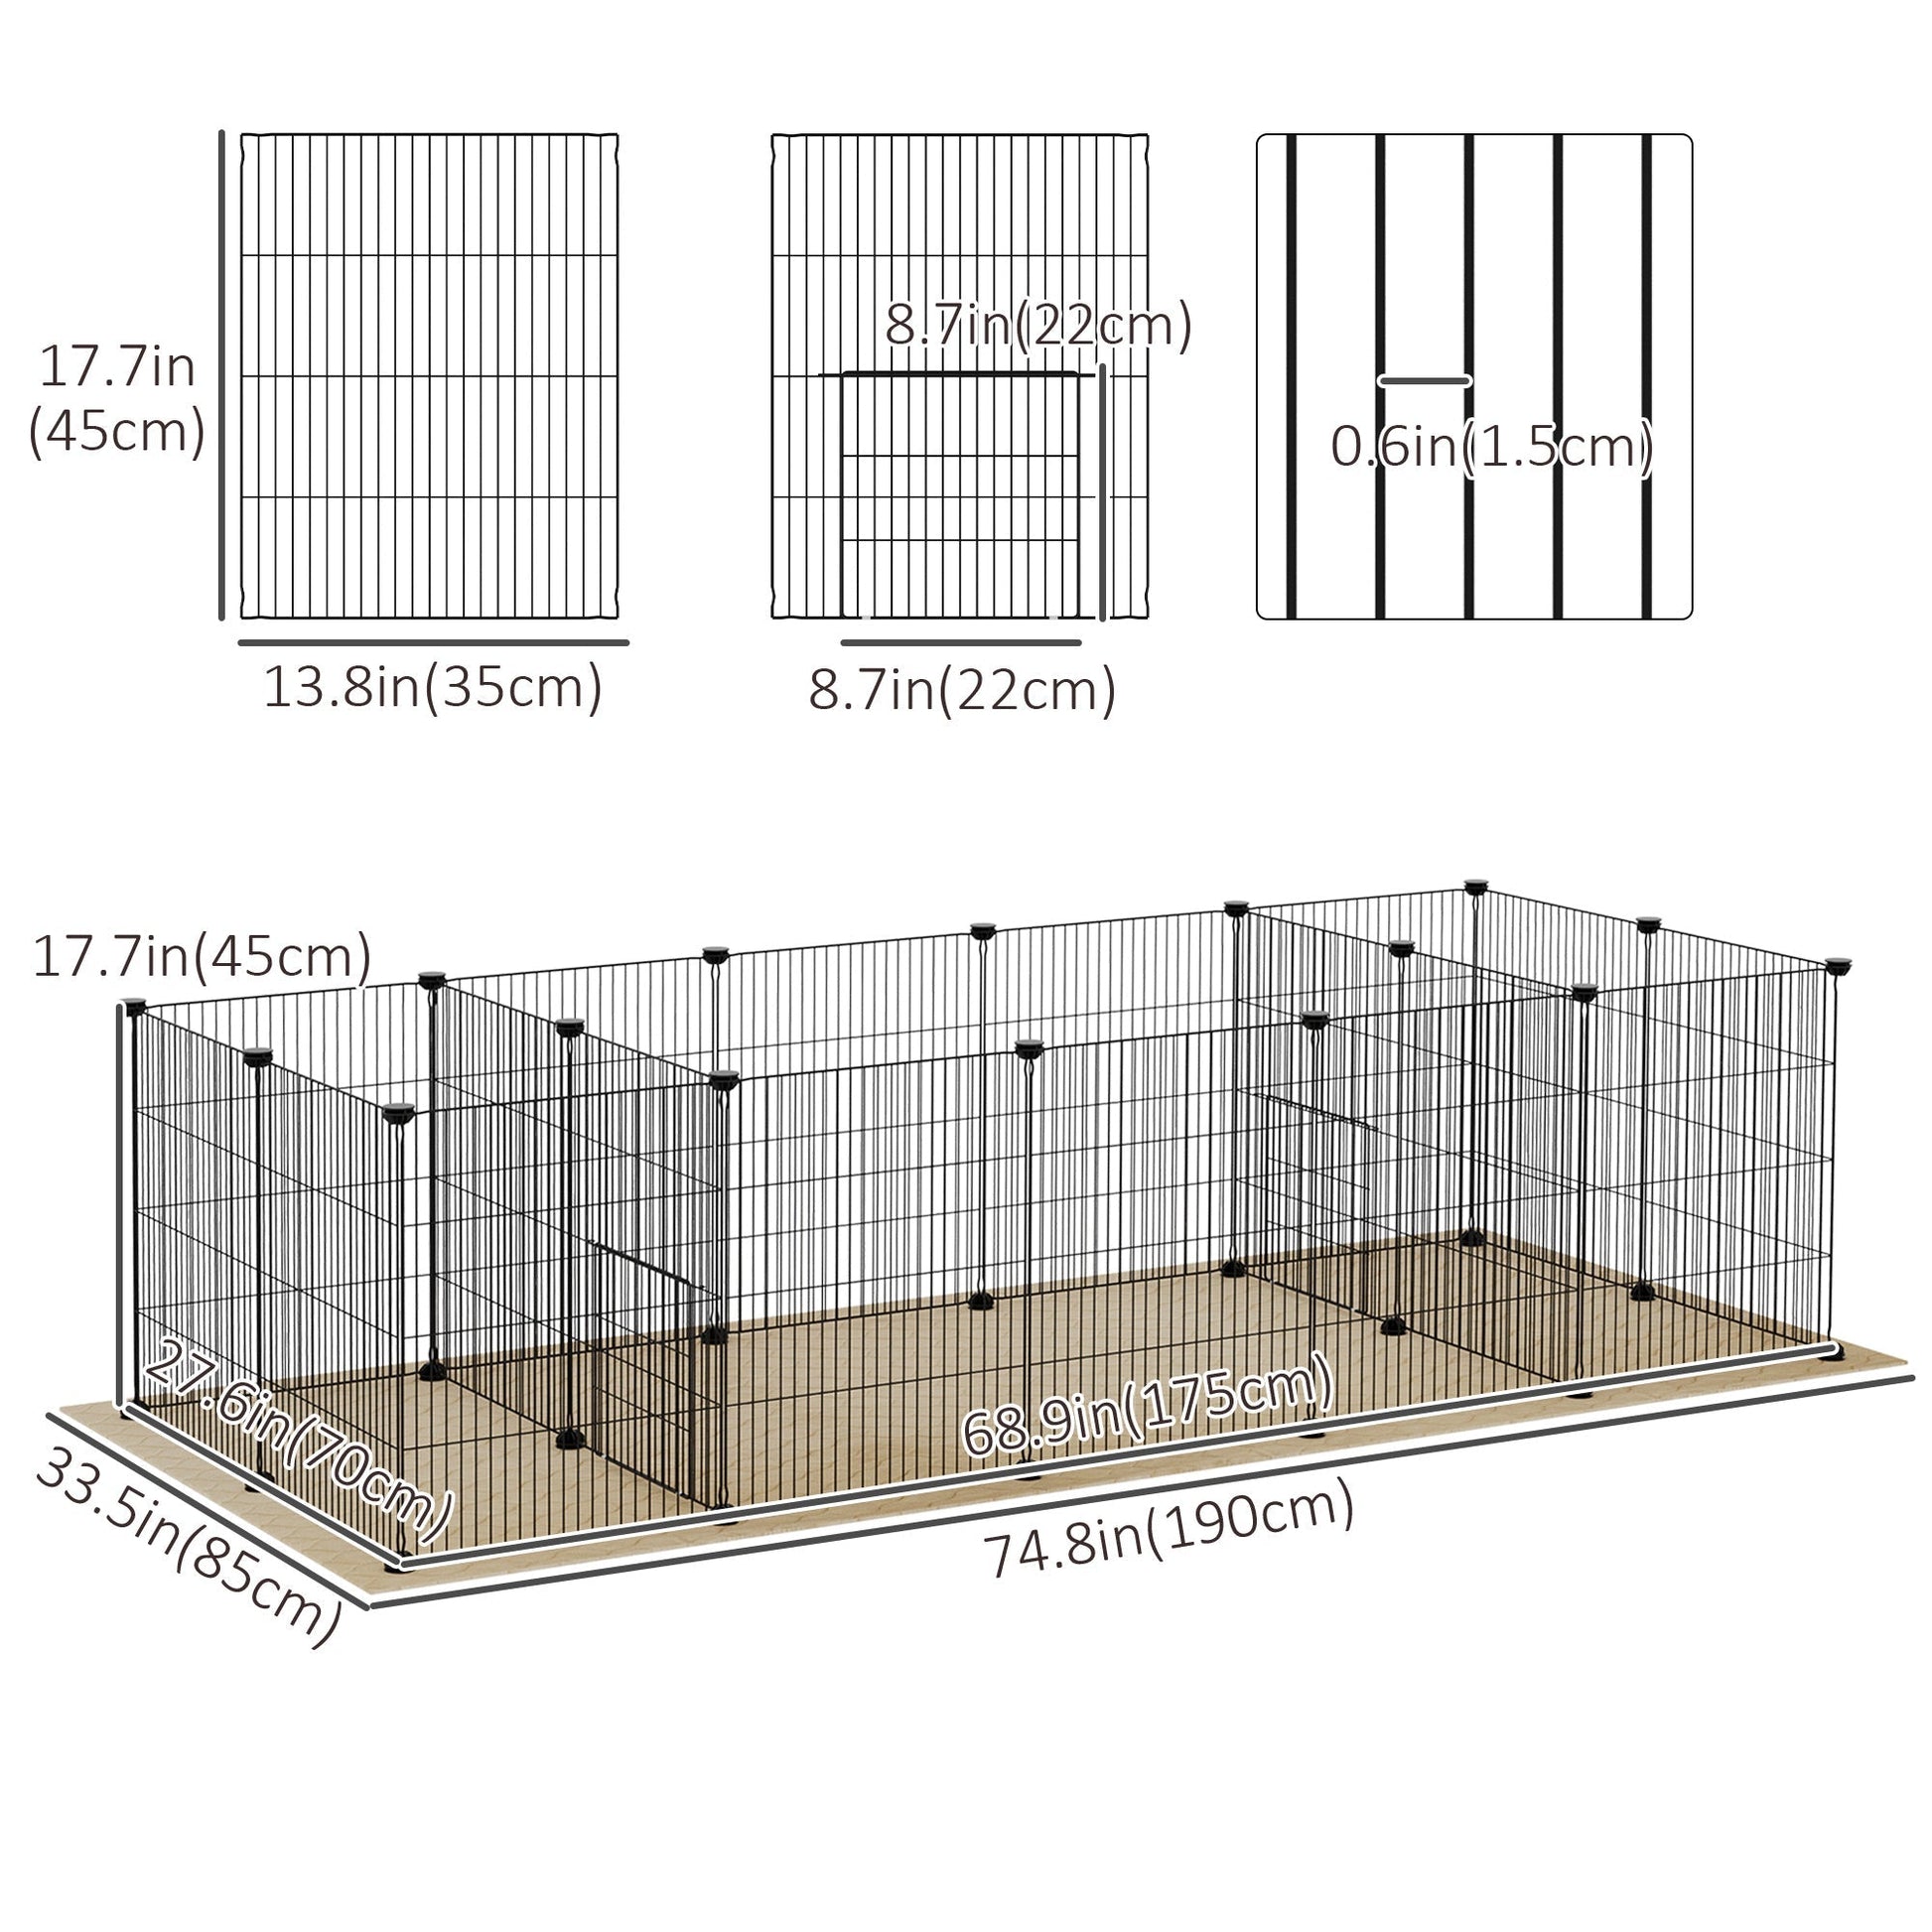 18 Panels Small Animal Cage w/ Water-resistant Mat, Doors, Guinea Pig Playpen, Portable Metal Wire for Hedgehogs at Gallery Canada